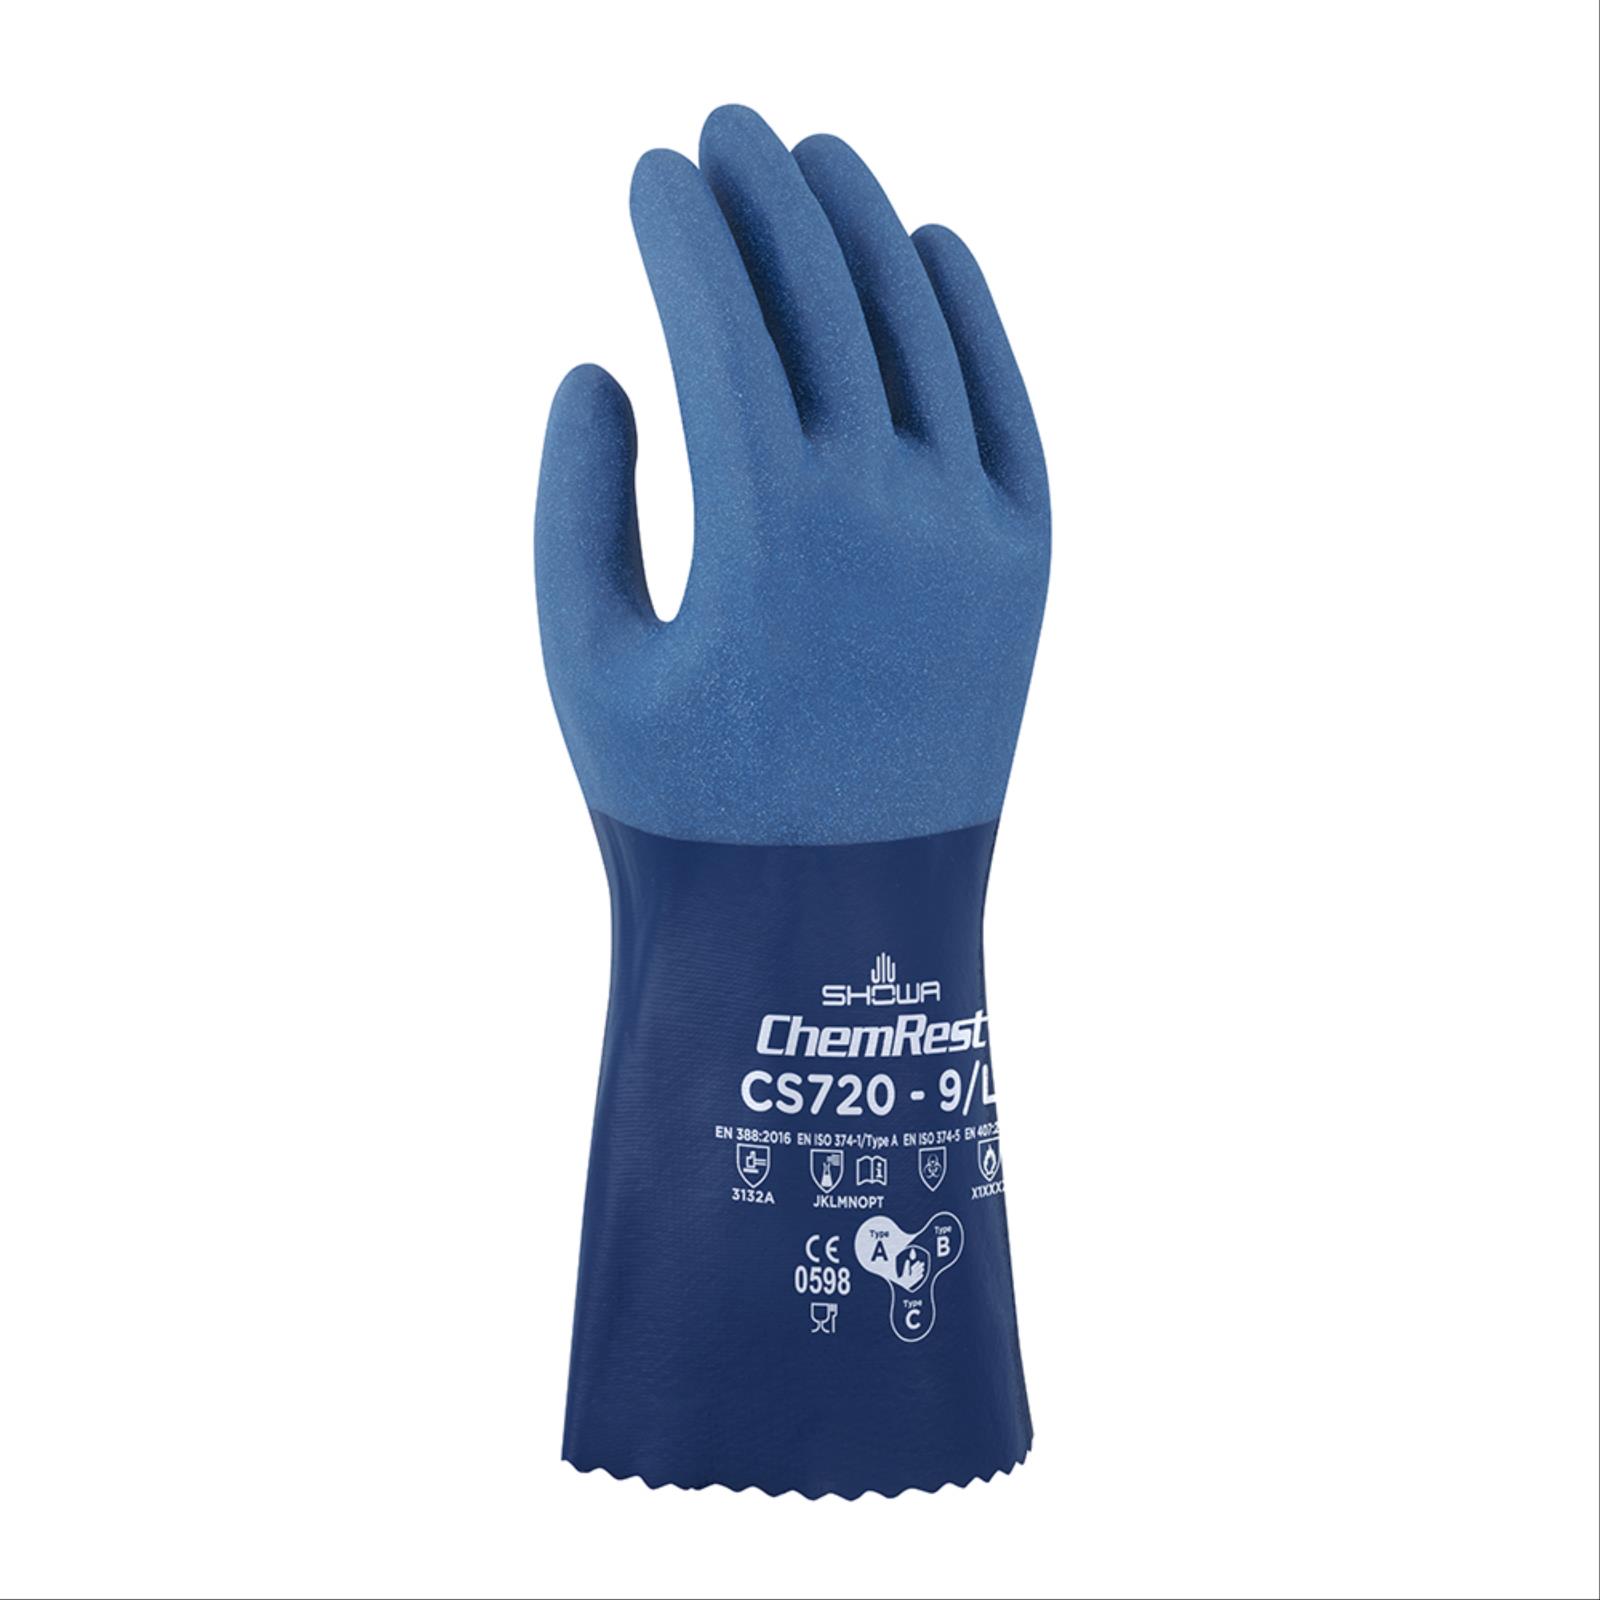 Rough Grip Nitrile Palm Coated Chemical Glove